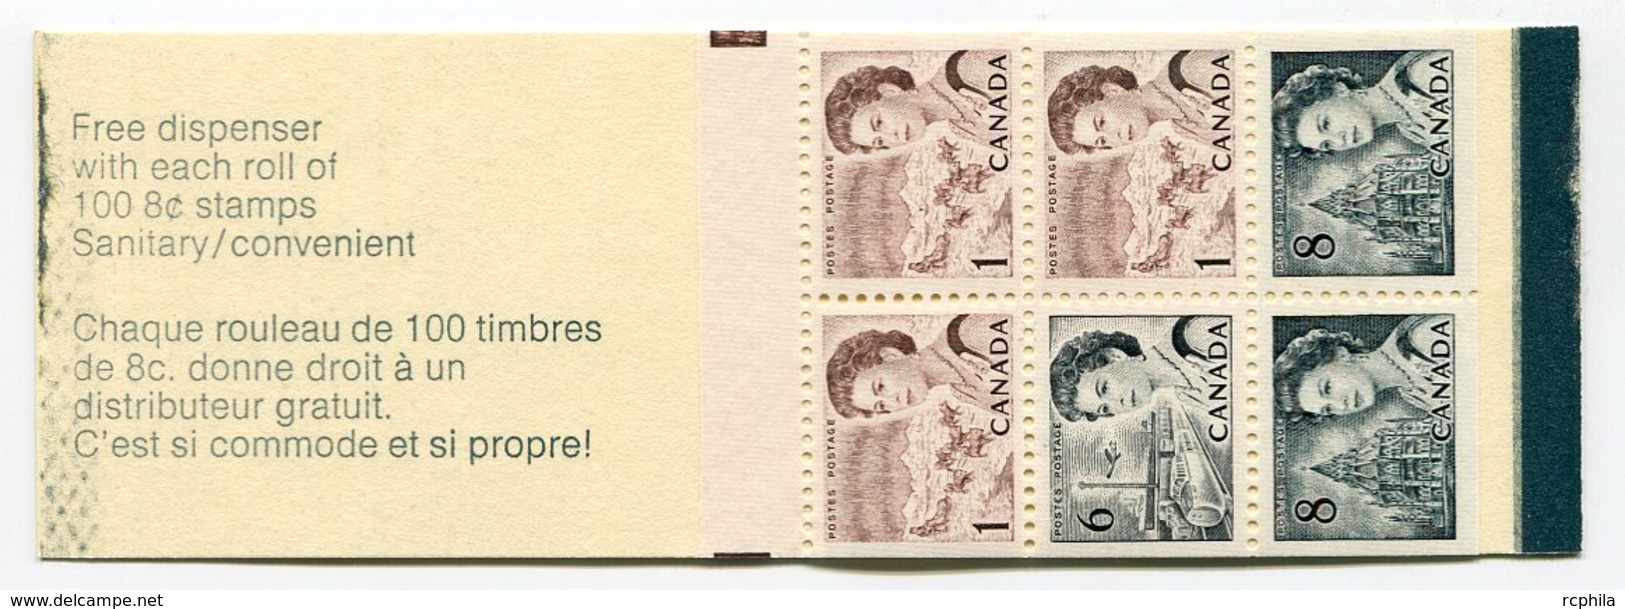 RC 15896 CANADA BK69 QUEEN ELIZABETH II CARNET COMPLET BOOKLET MNH NEUF ** - Carnets Complets